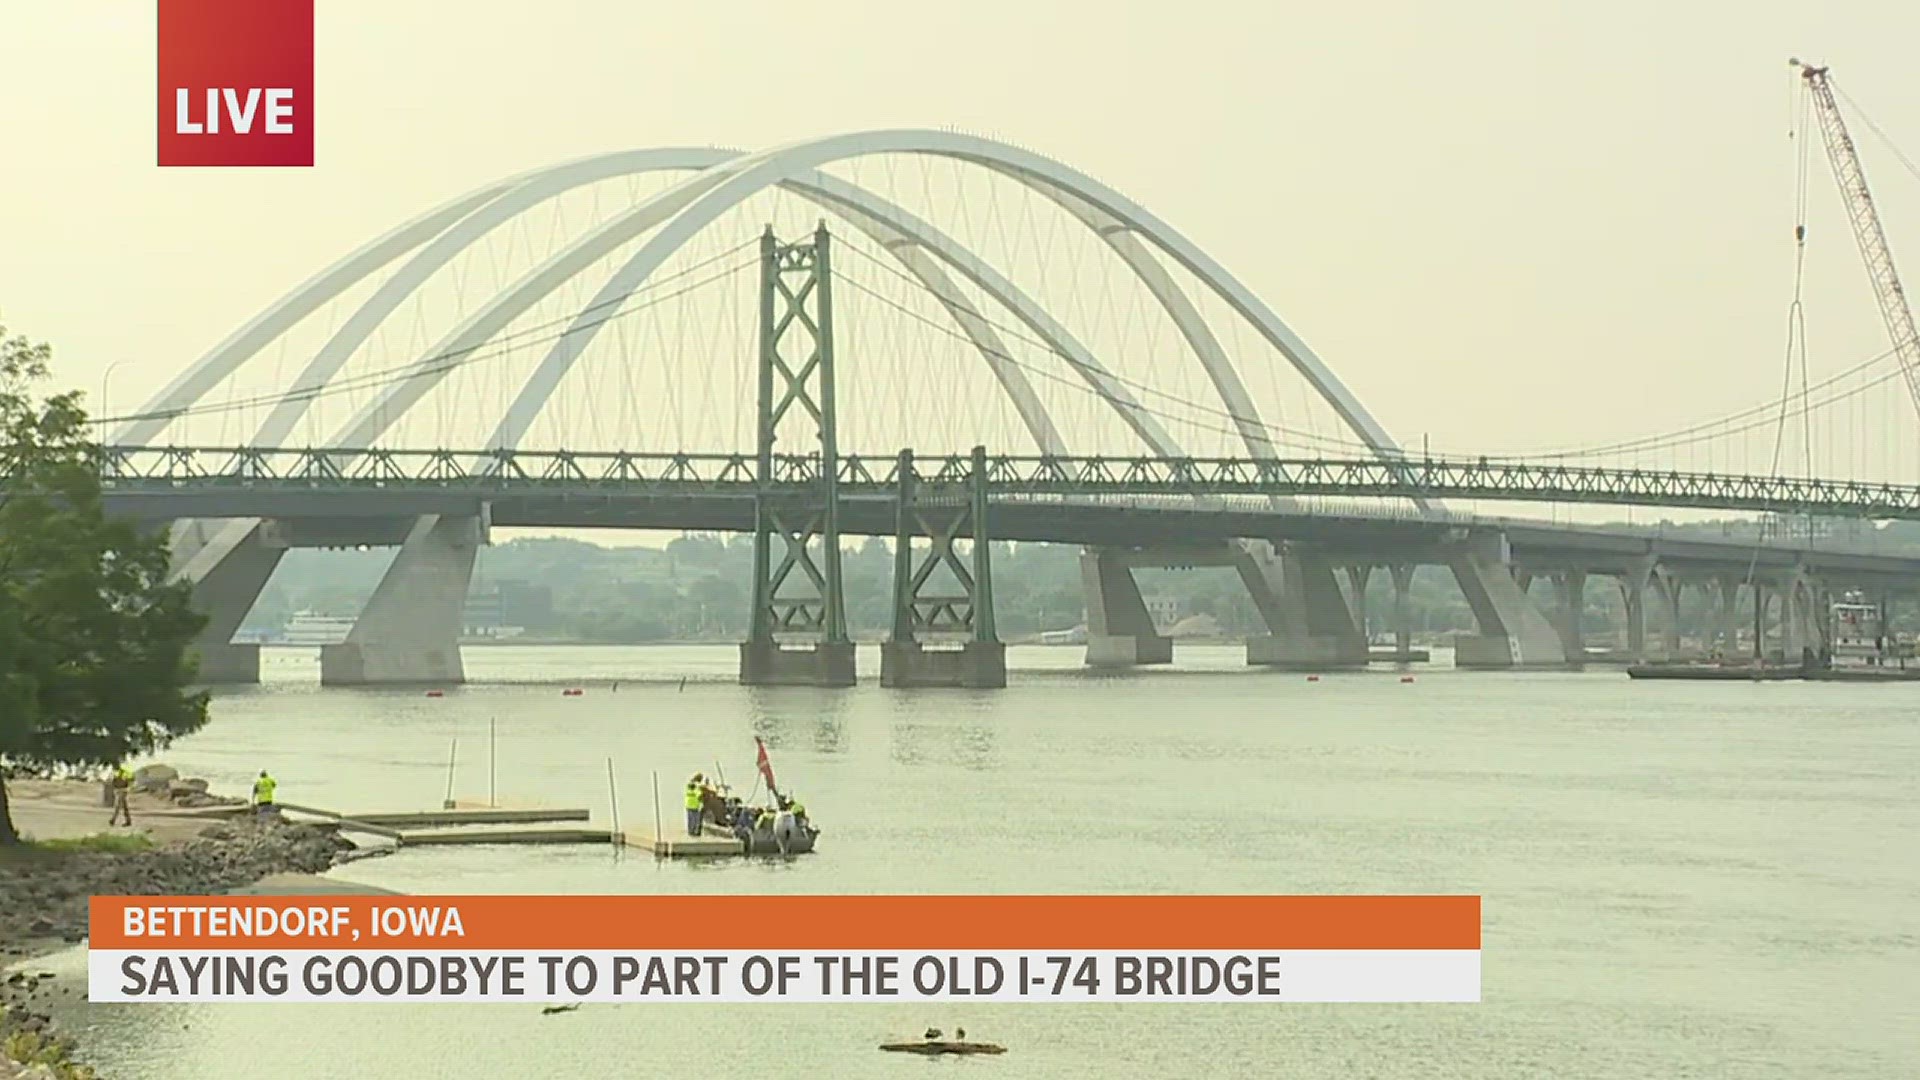 On Sunday, June 18, demolition crews took down the Illinois-bound side of the old I-74 Bridge. Hear from a longtime Quad Citizen recalling memories of the bridge.